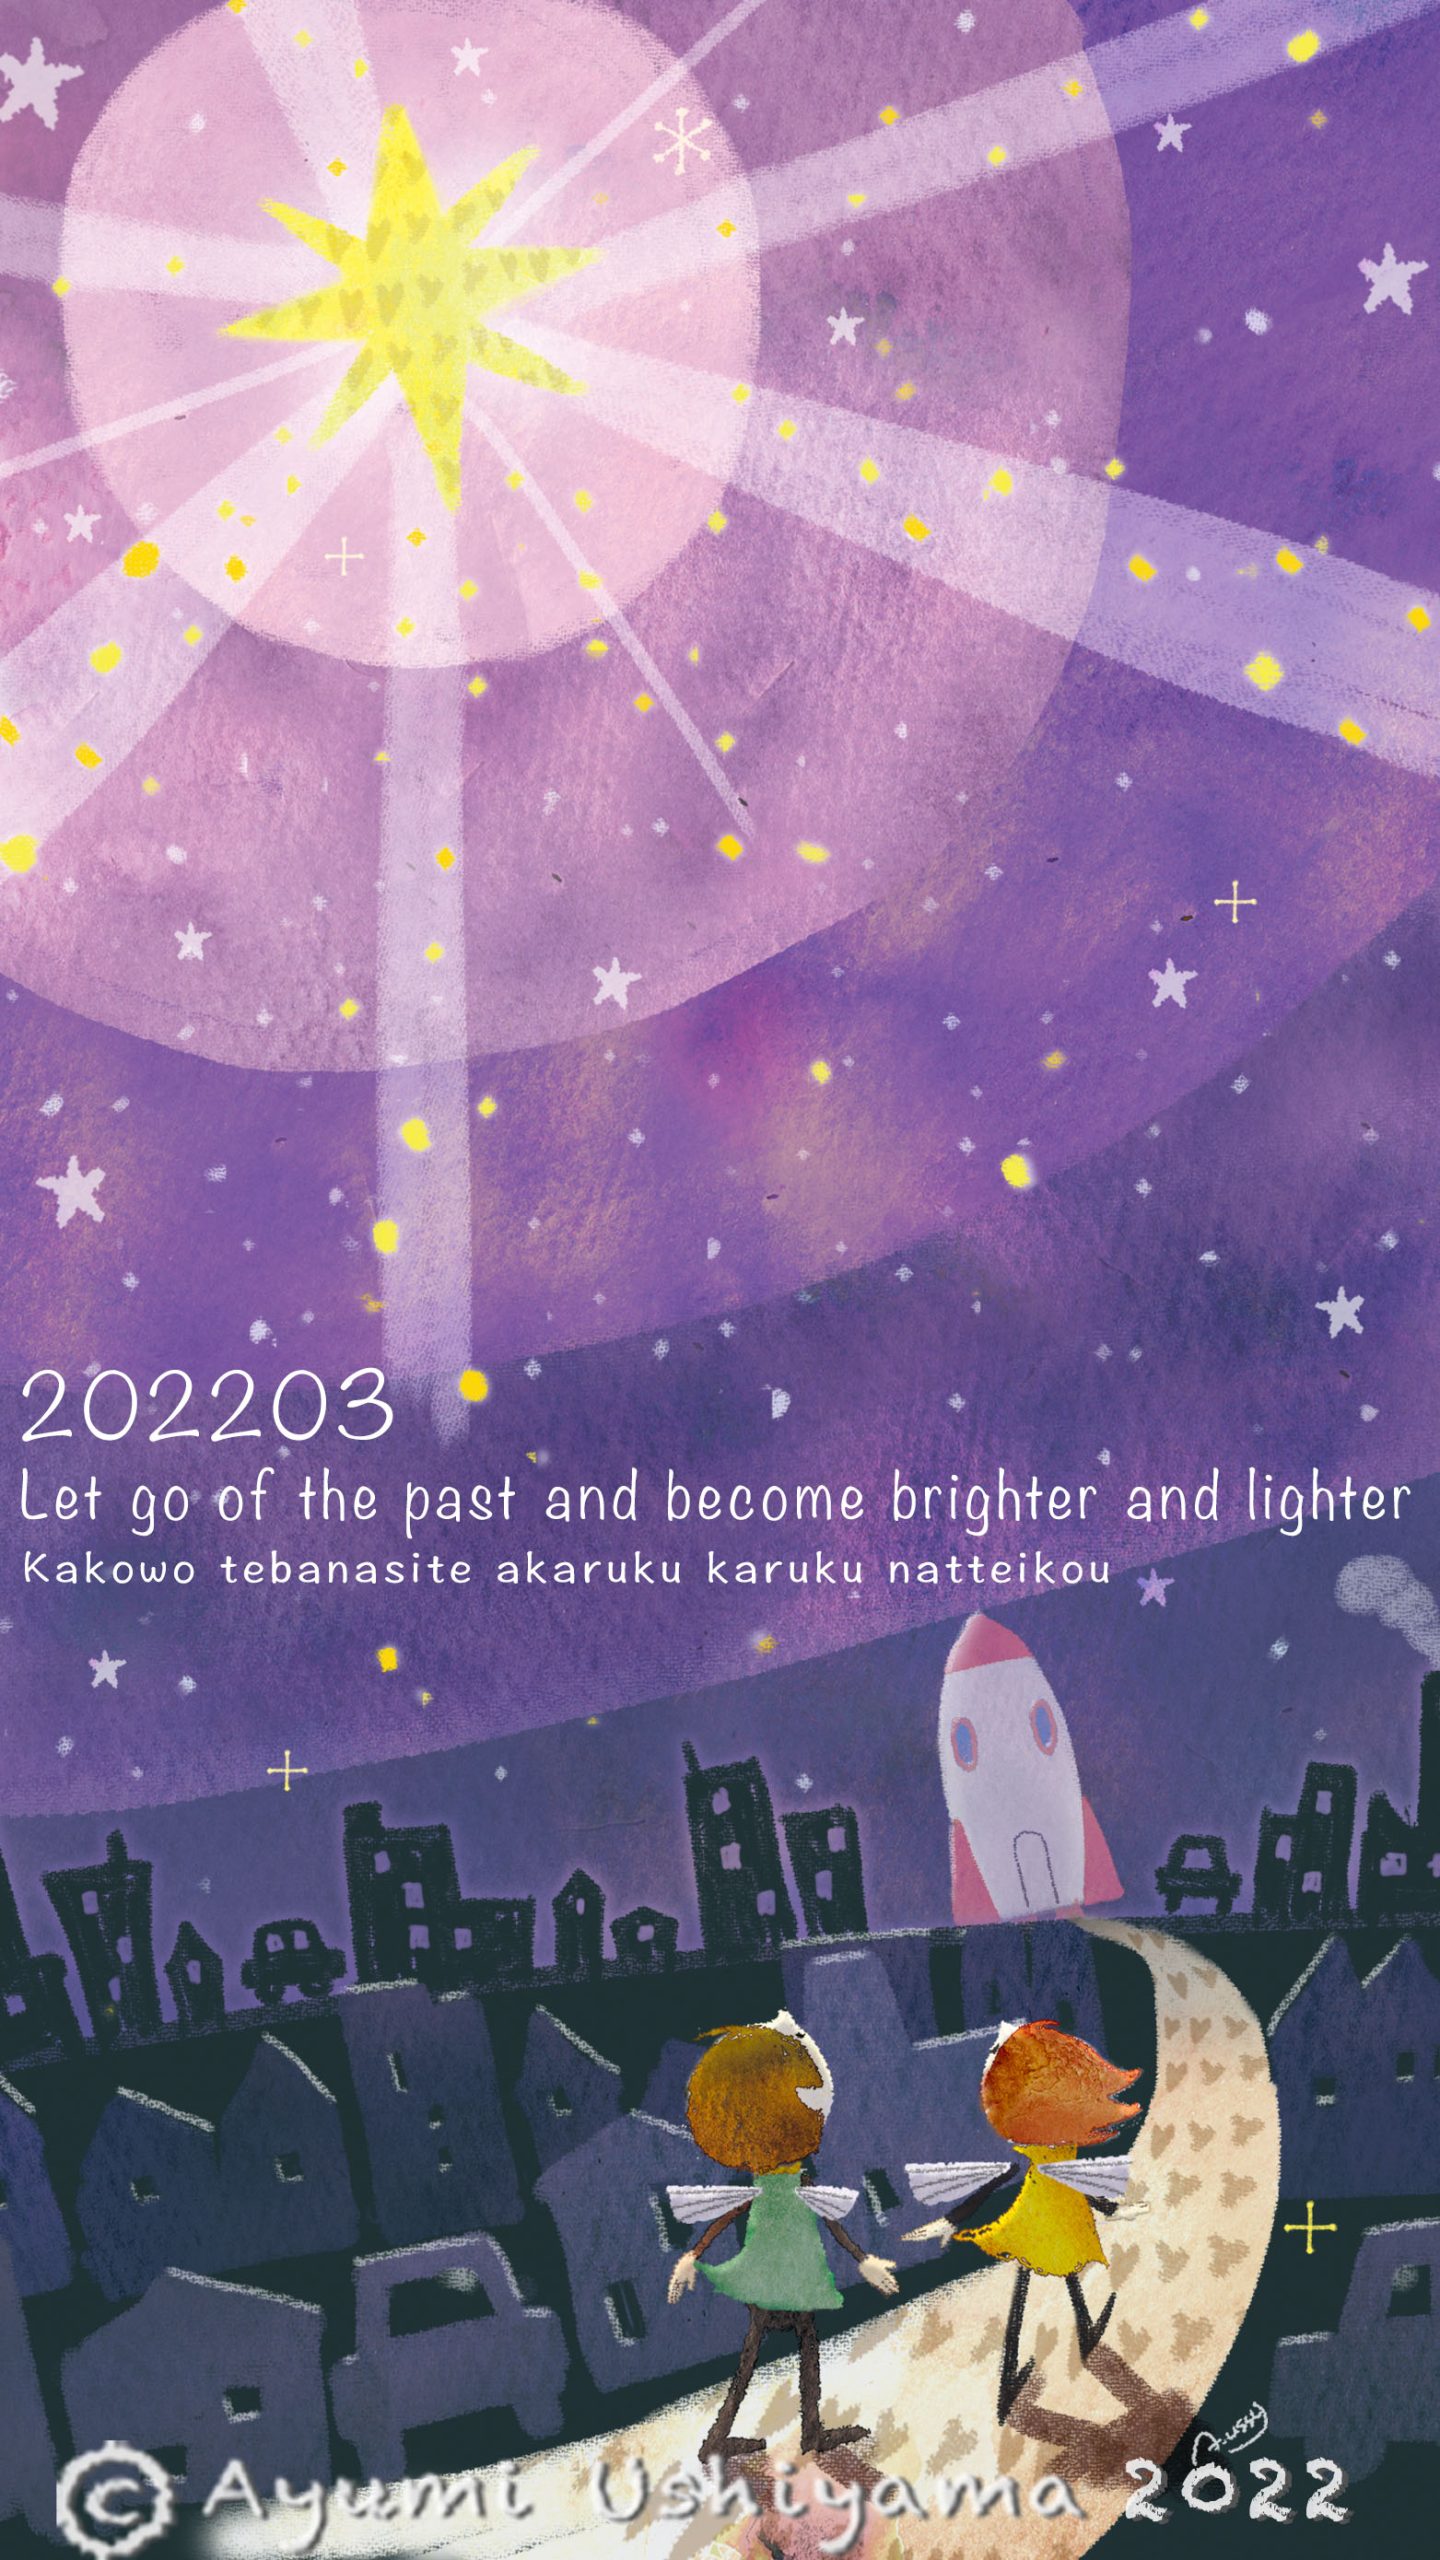 2022.03『Let go of the past and become brighter and lighter』ローマ字